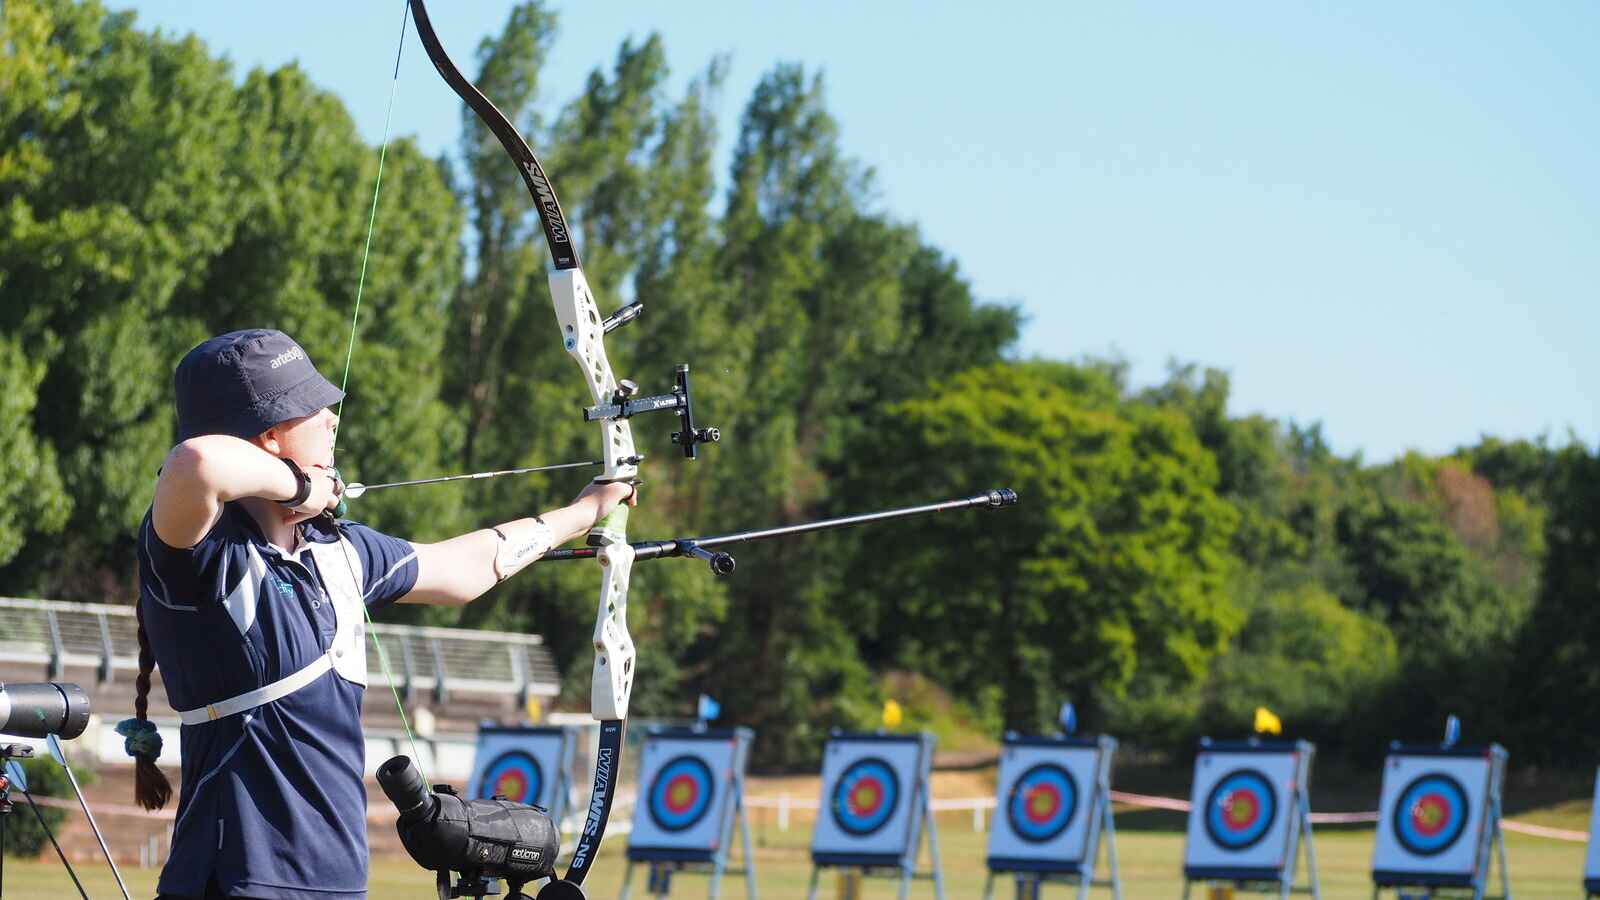 Archery Day 2023: Date, History, Facts, Activities